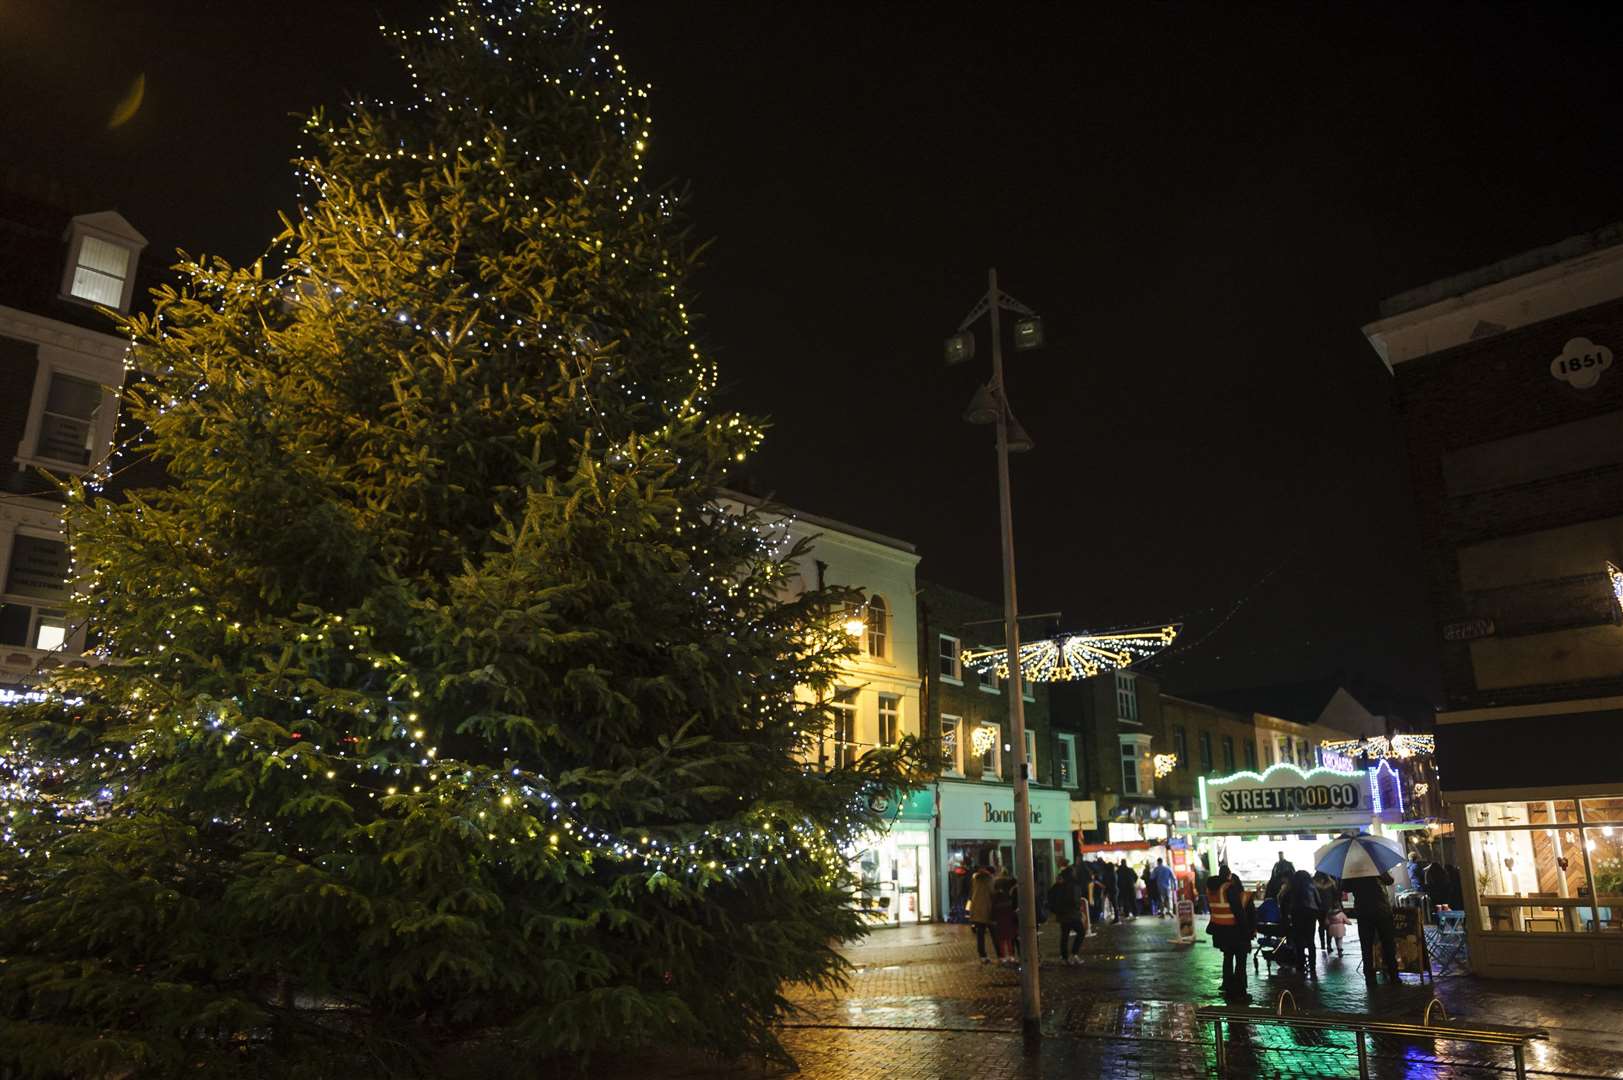 The lights last year in Dartford town centre